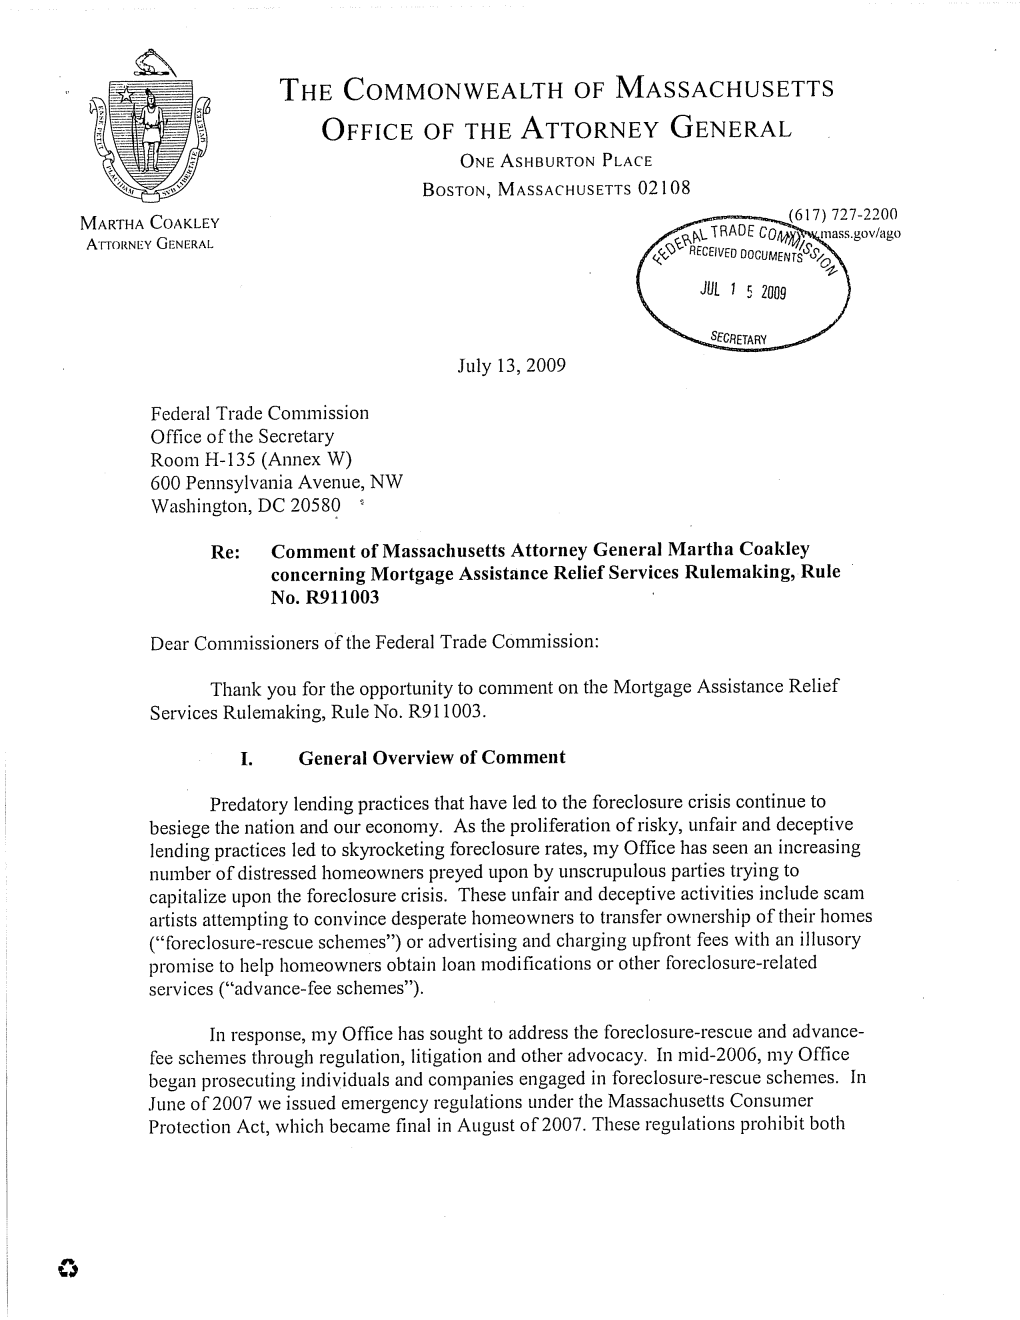 Comment Submitted by Massachusetts Attorney General